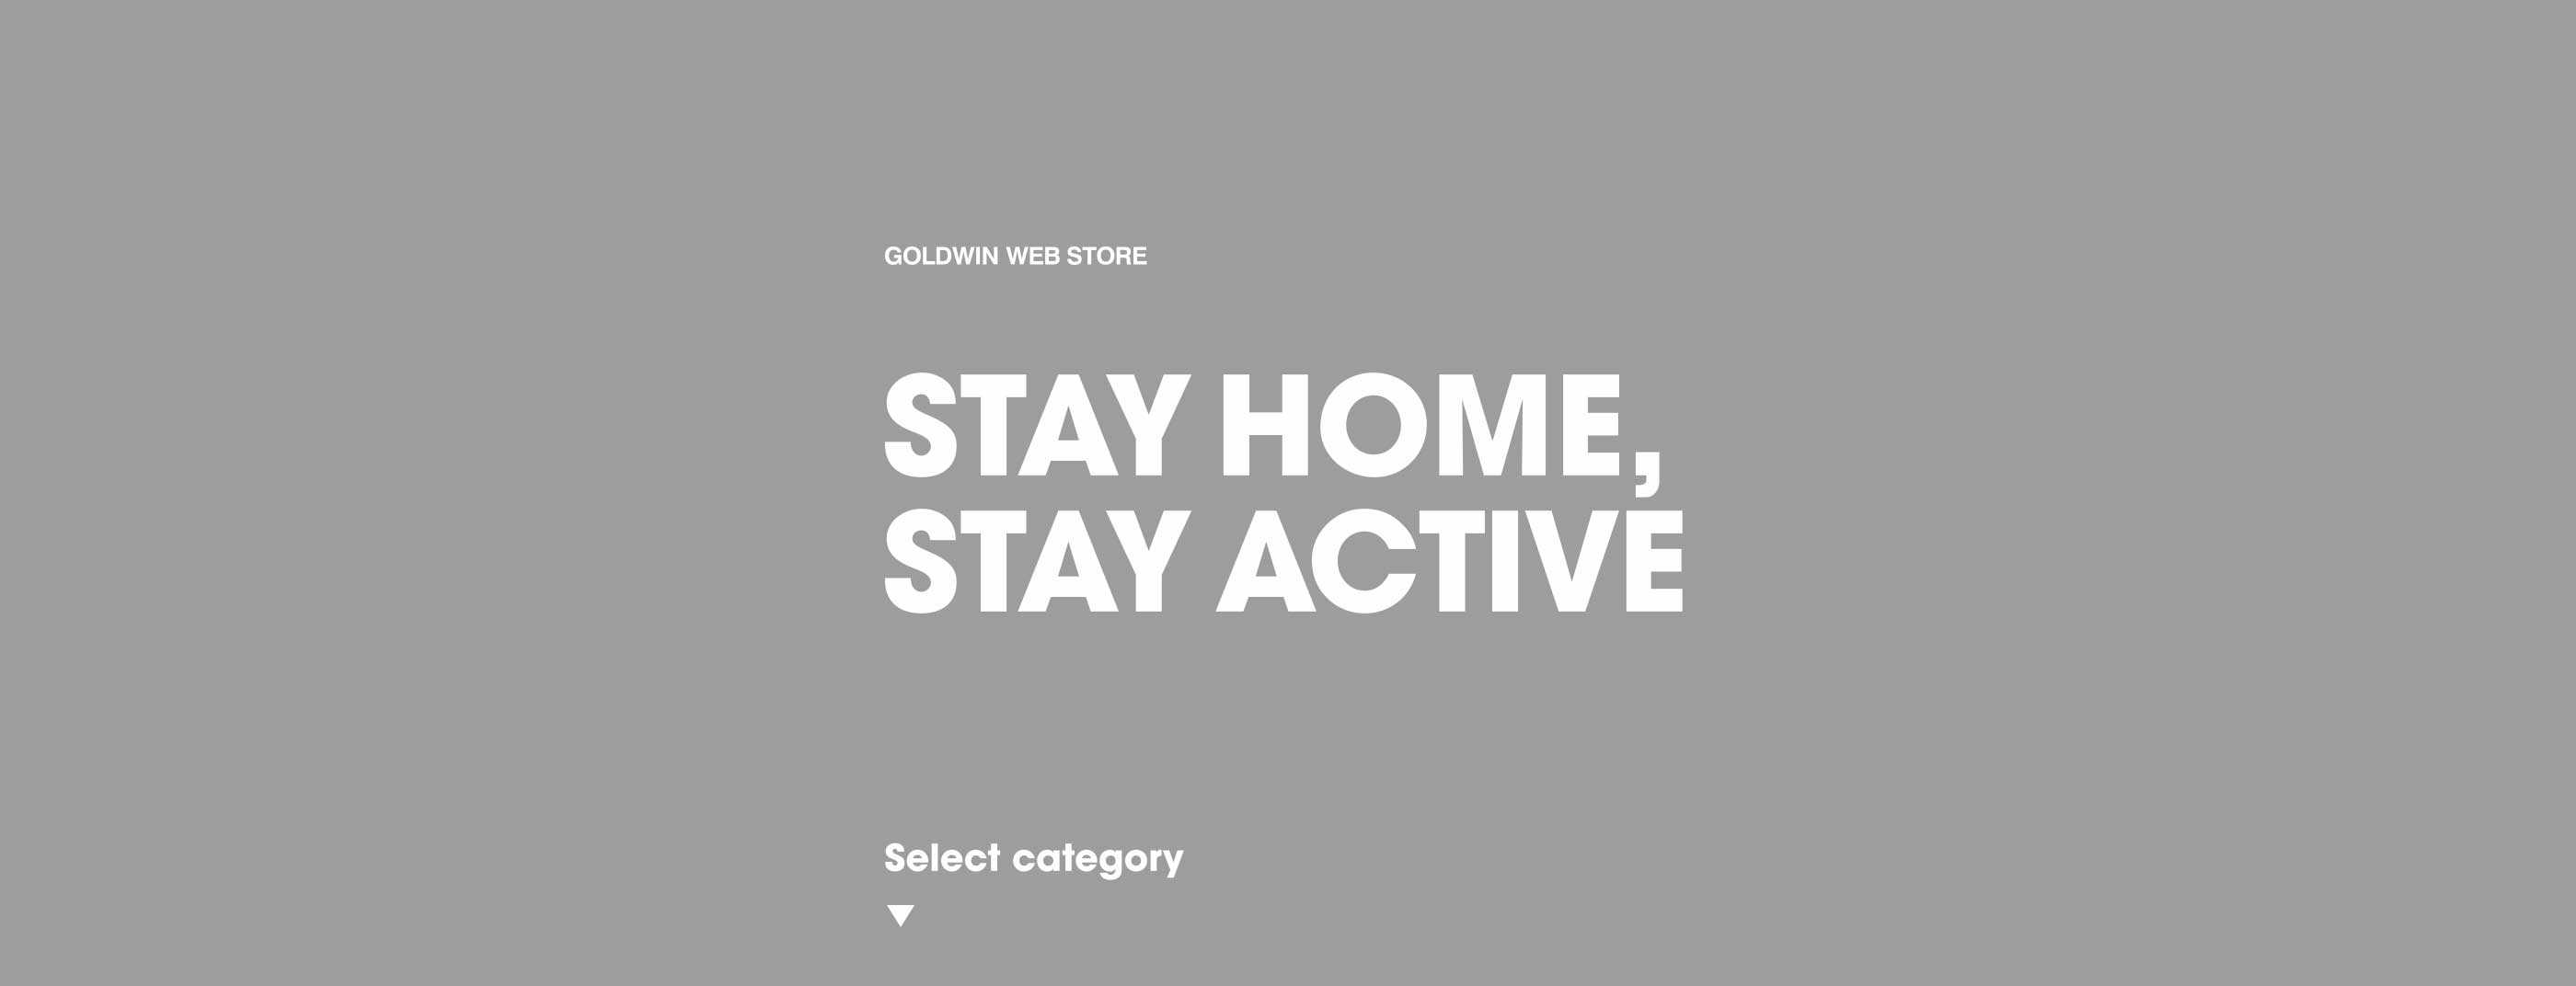 STAY HOME, STAY ACTIVE